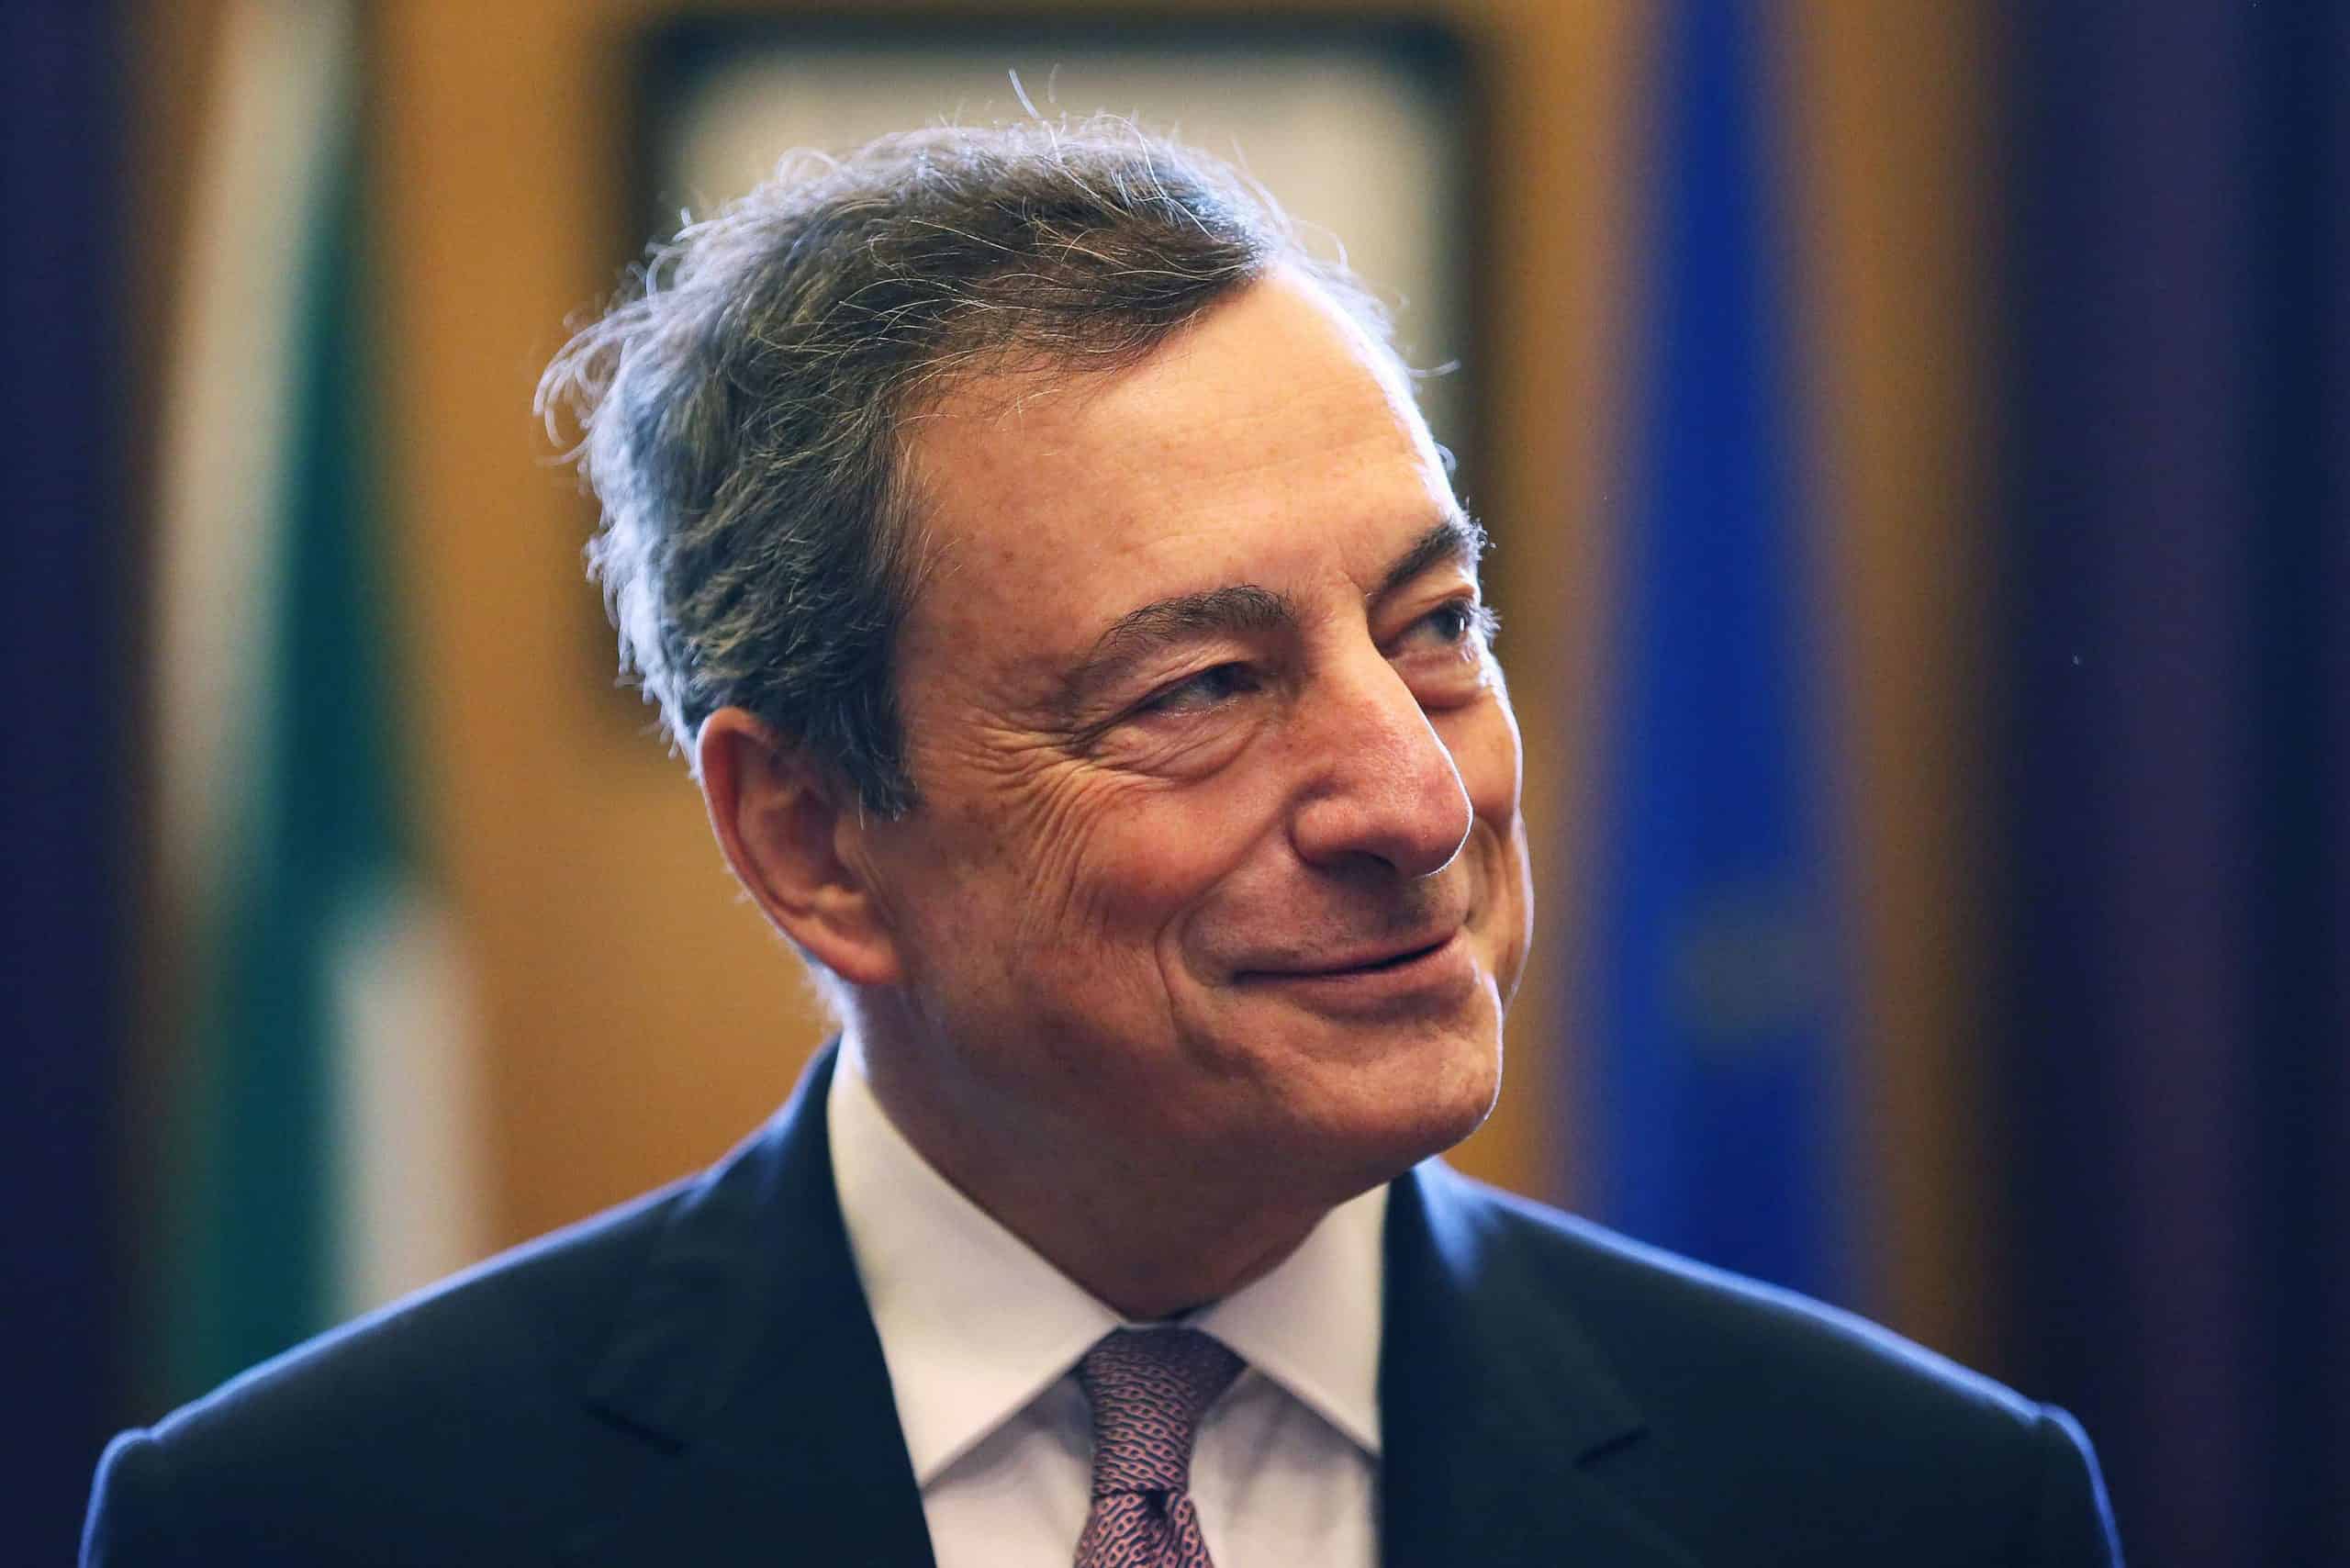 Take note, Boris: Mario Draghi, Italy’s prime minister, will waive his salary